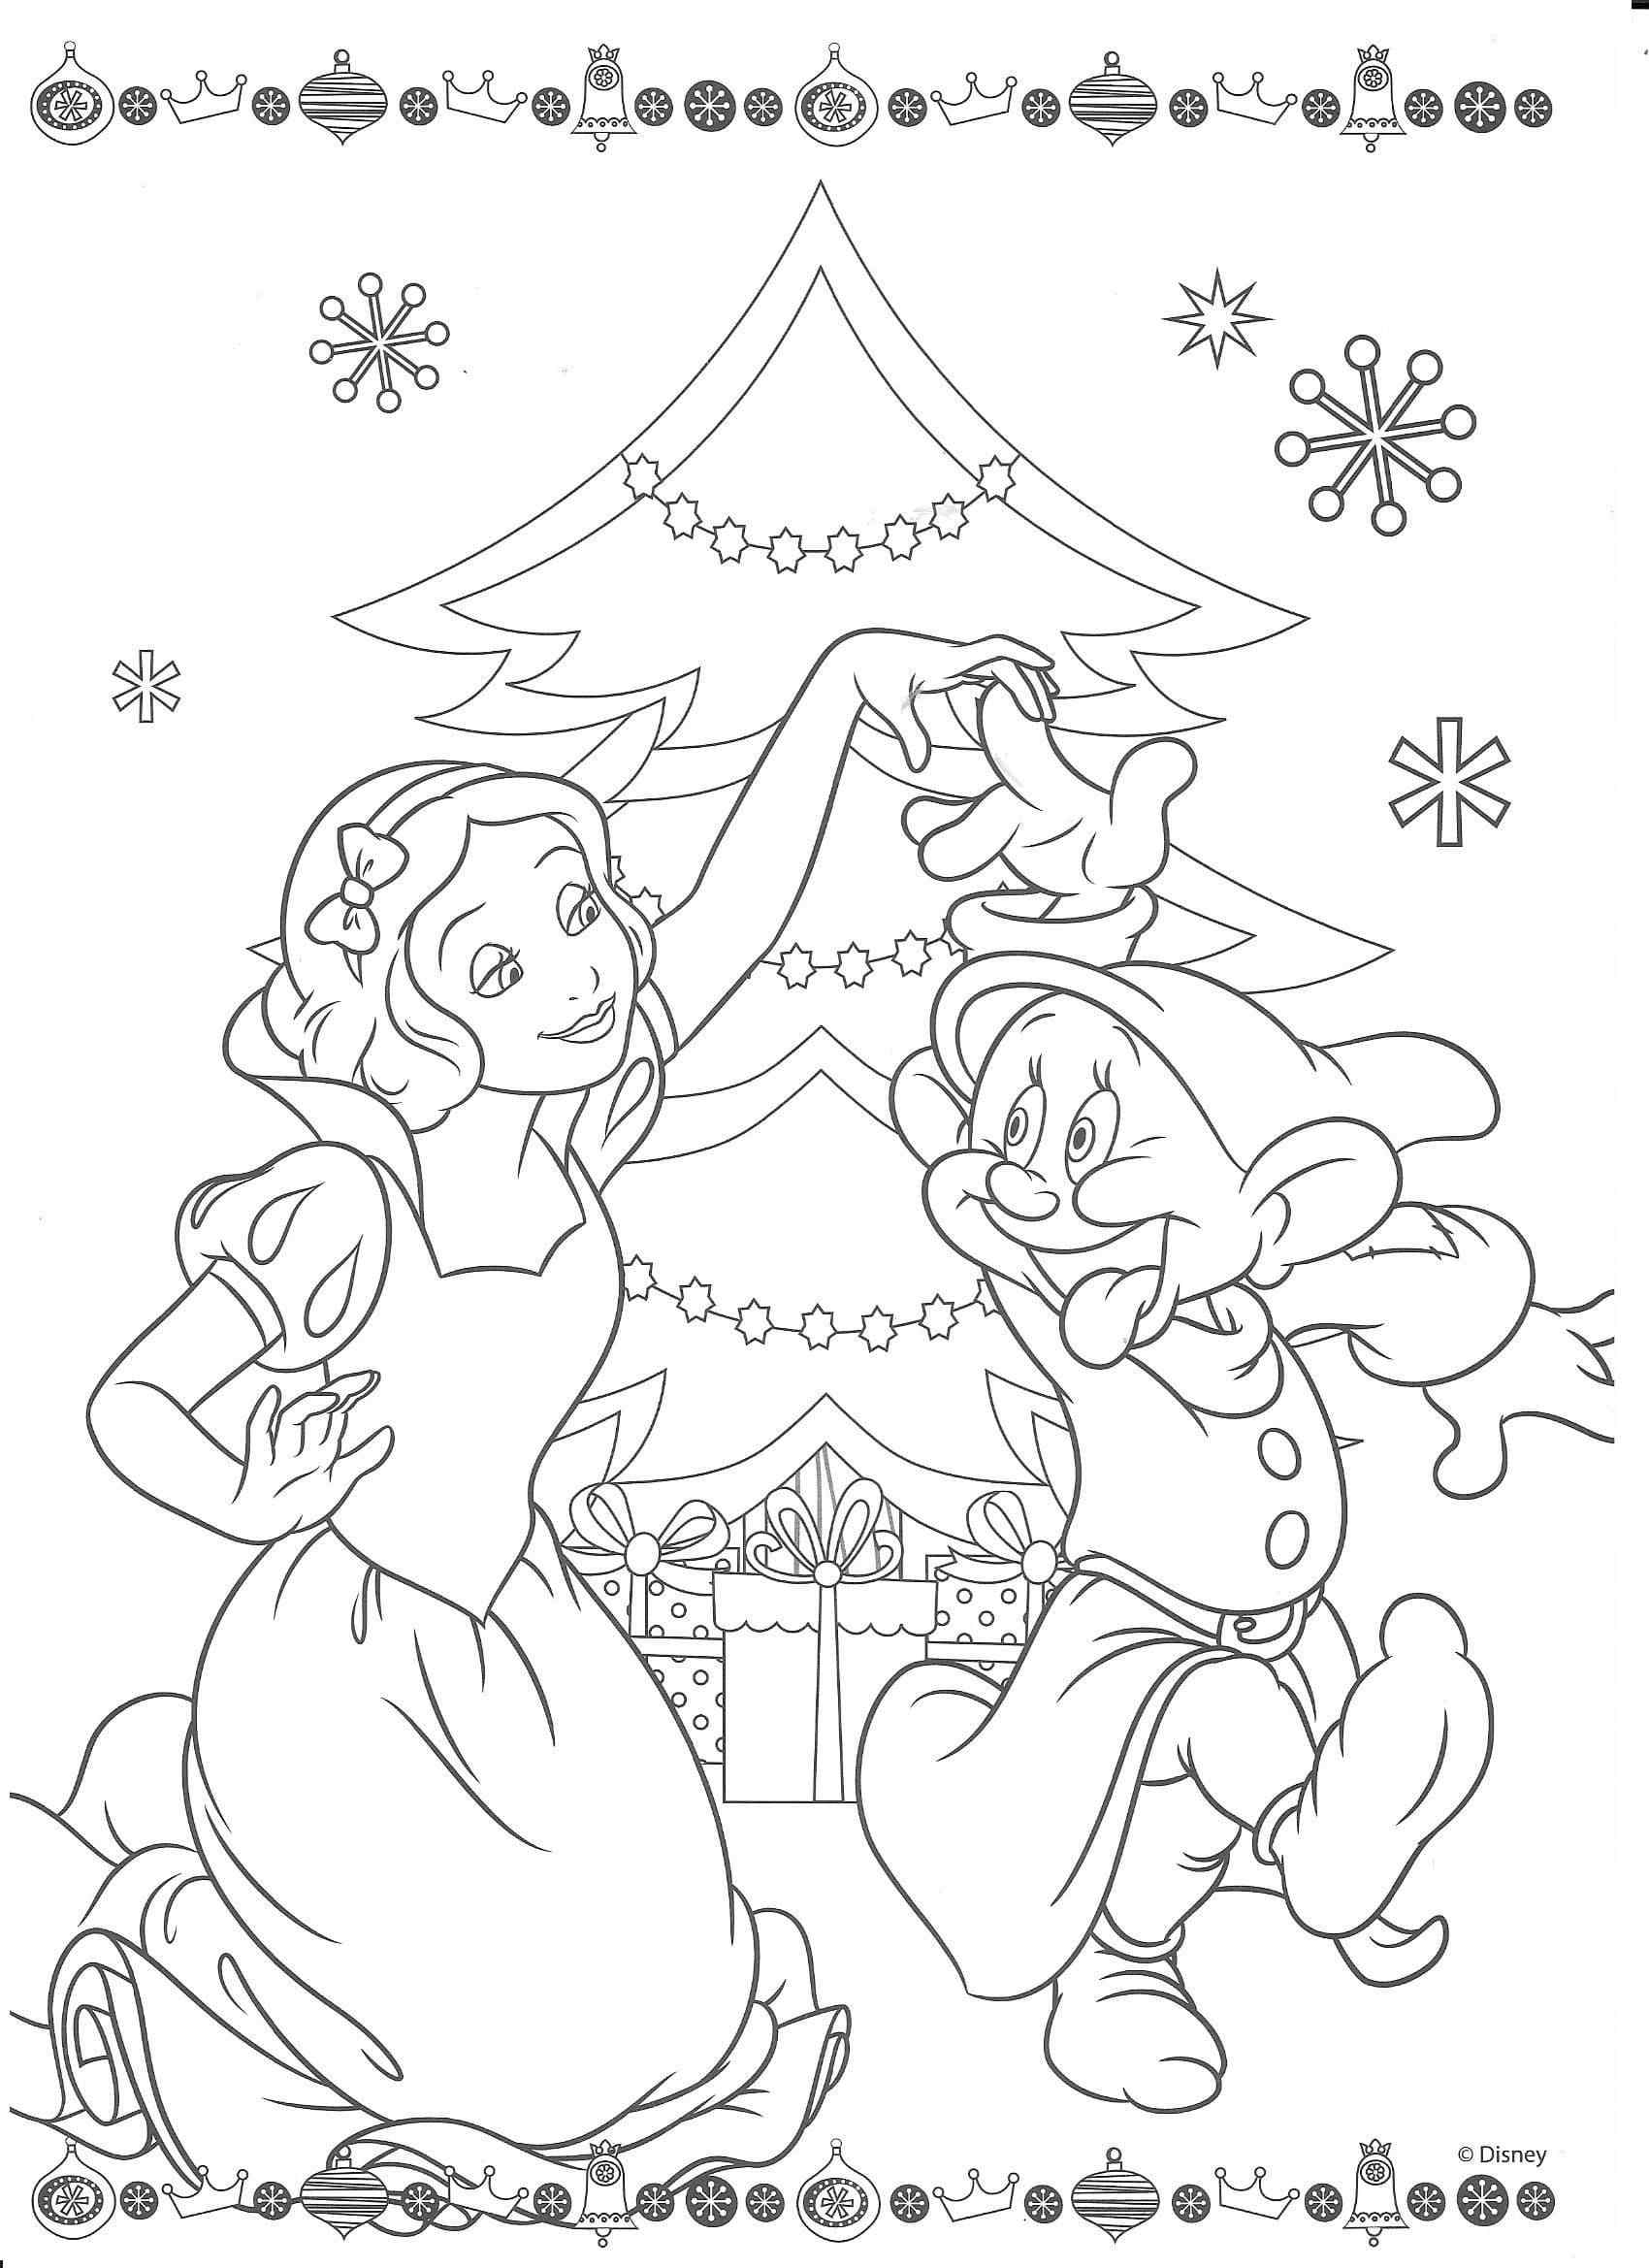 Dancing Around The Tree Coloring Page